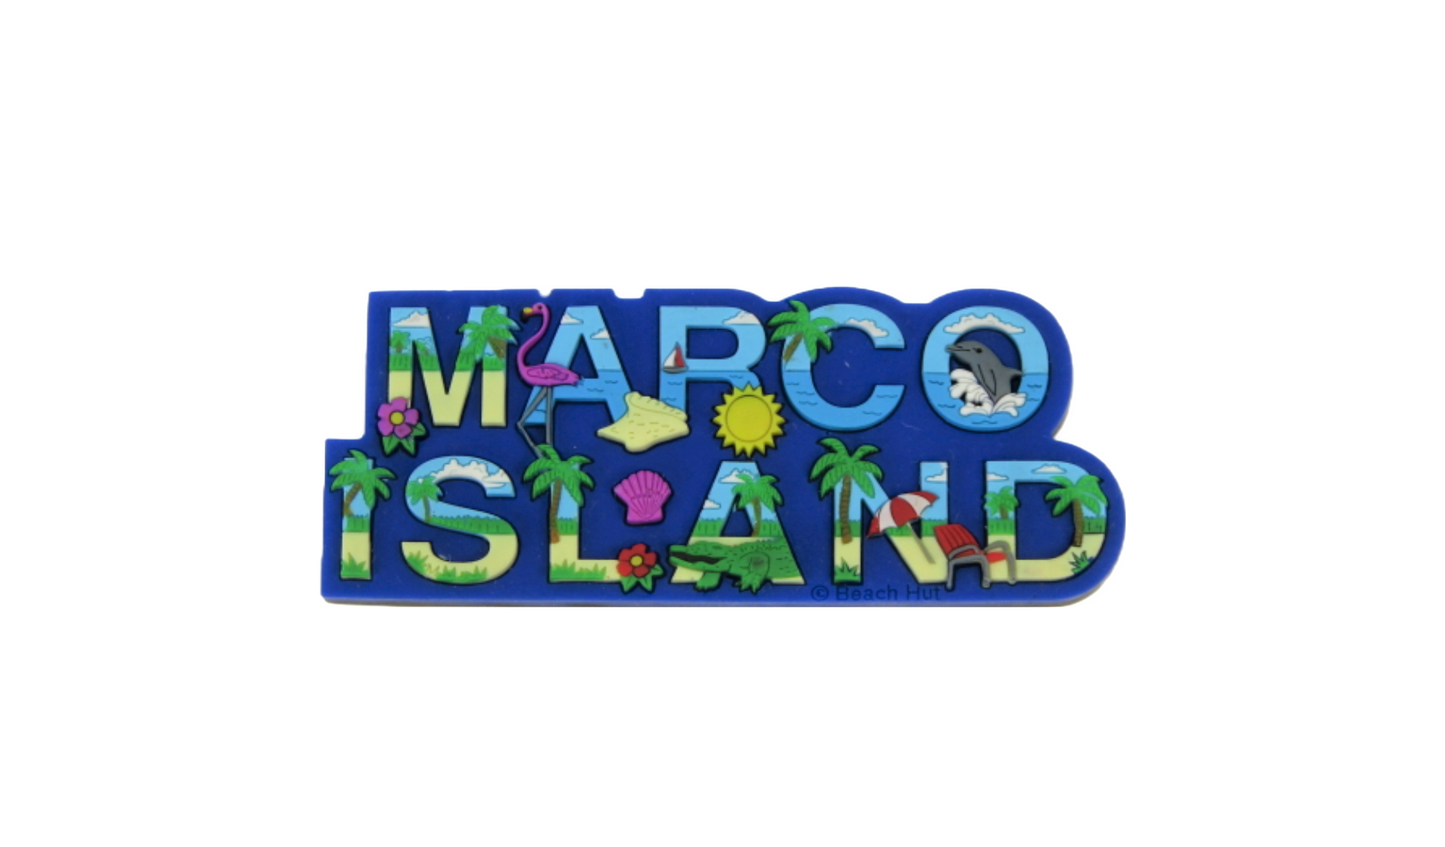 RM0105 MARCO ISLAND LETTERS